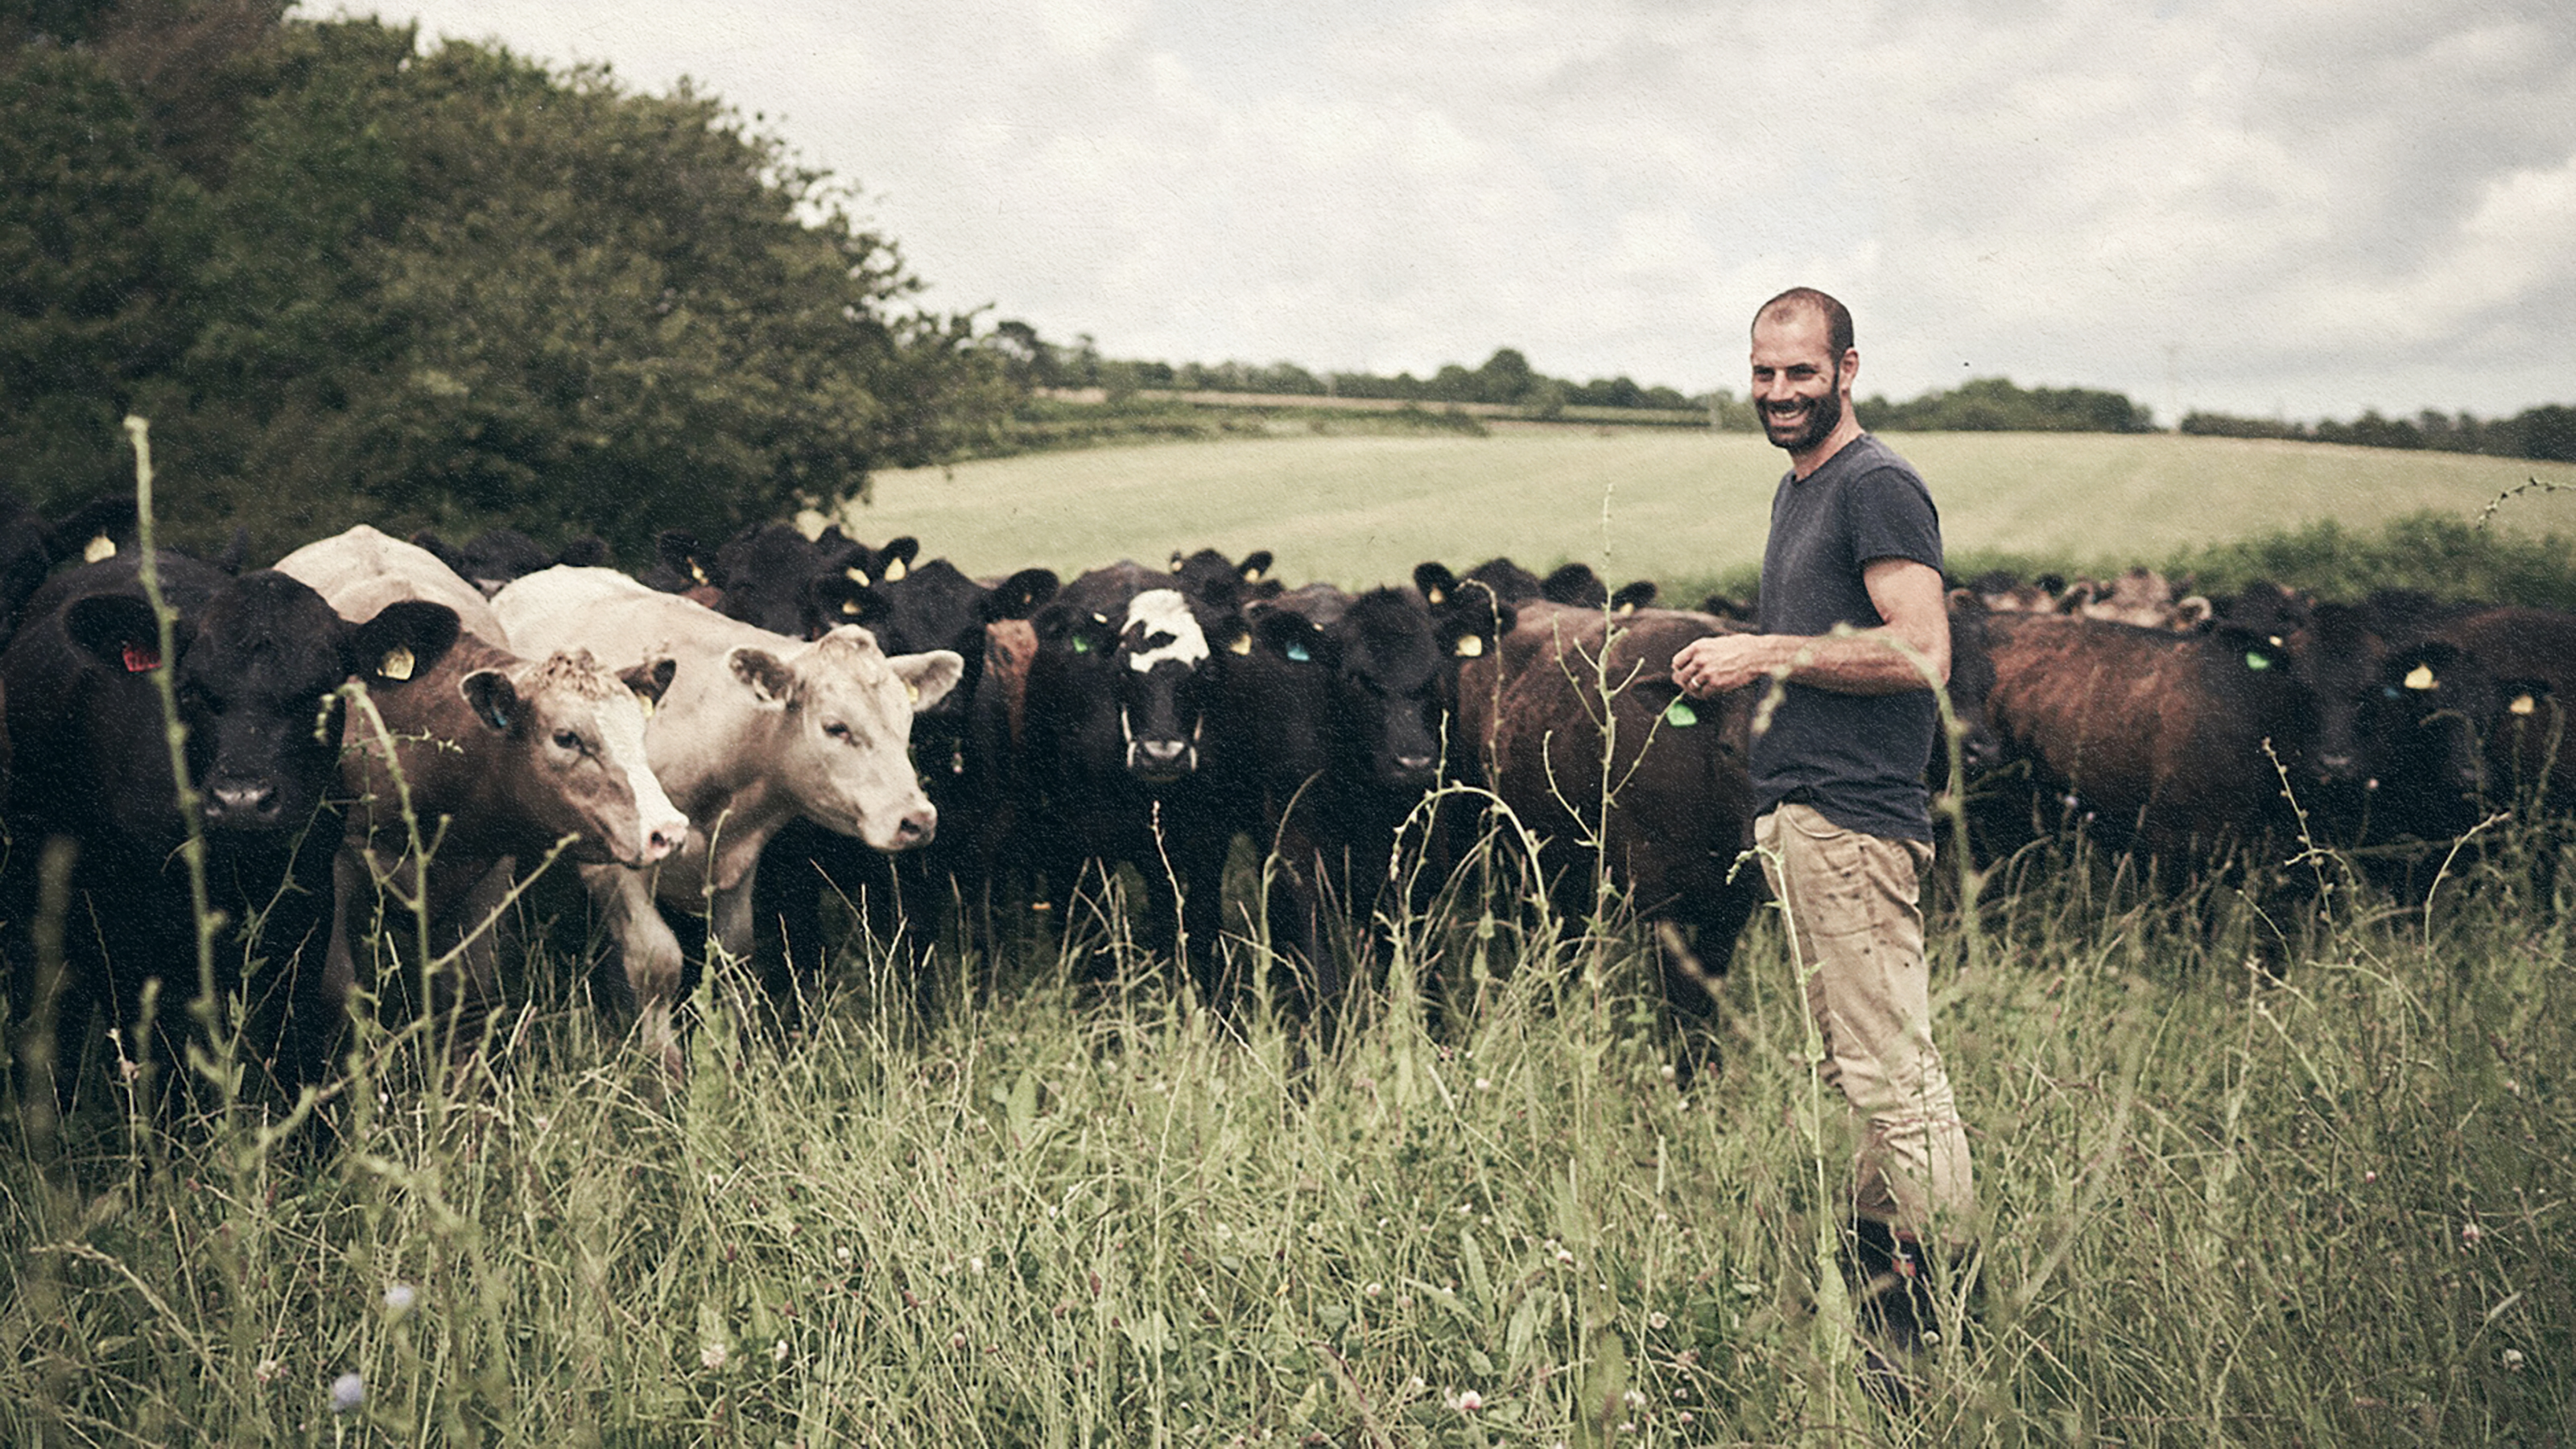 A man overseeing a herd of cows in an animal agriculture setting.